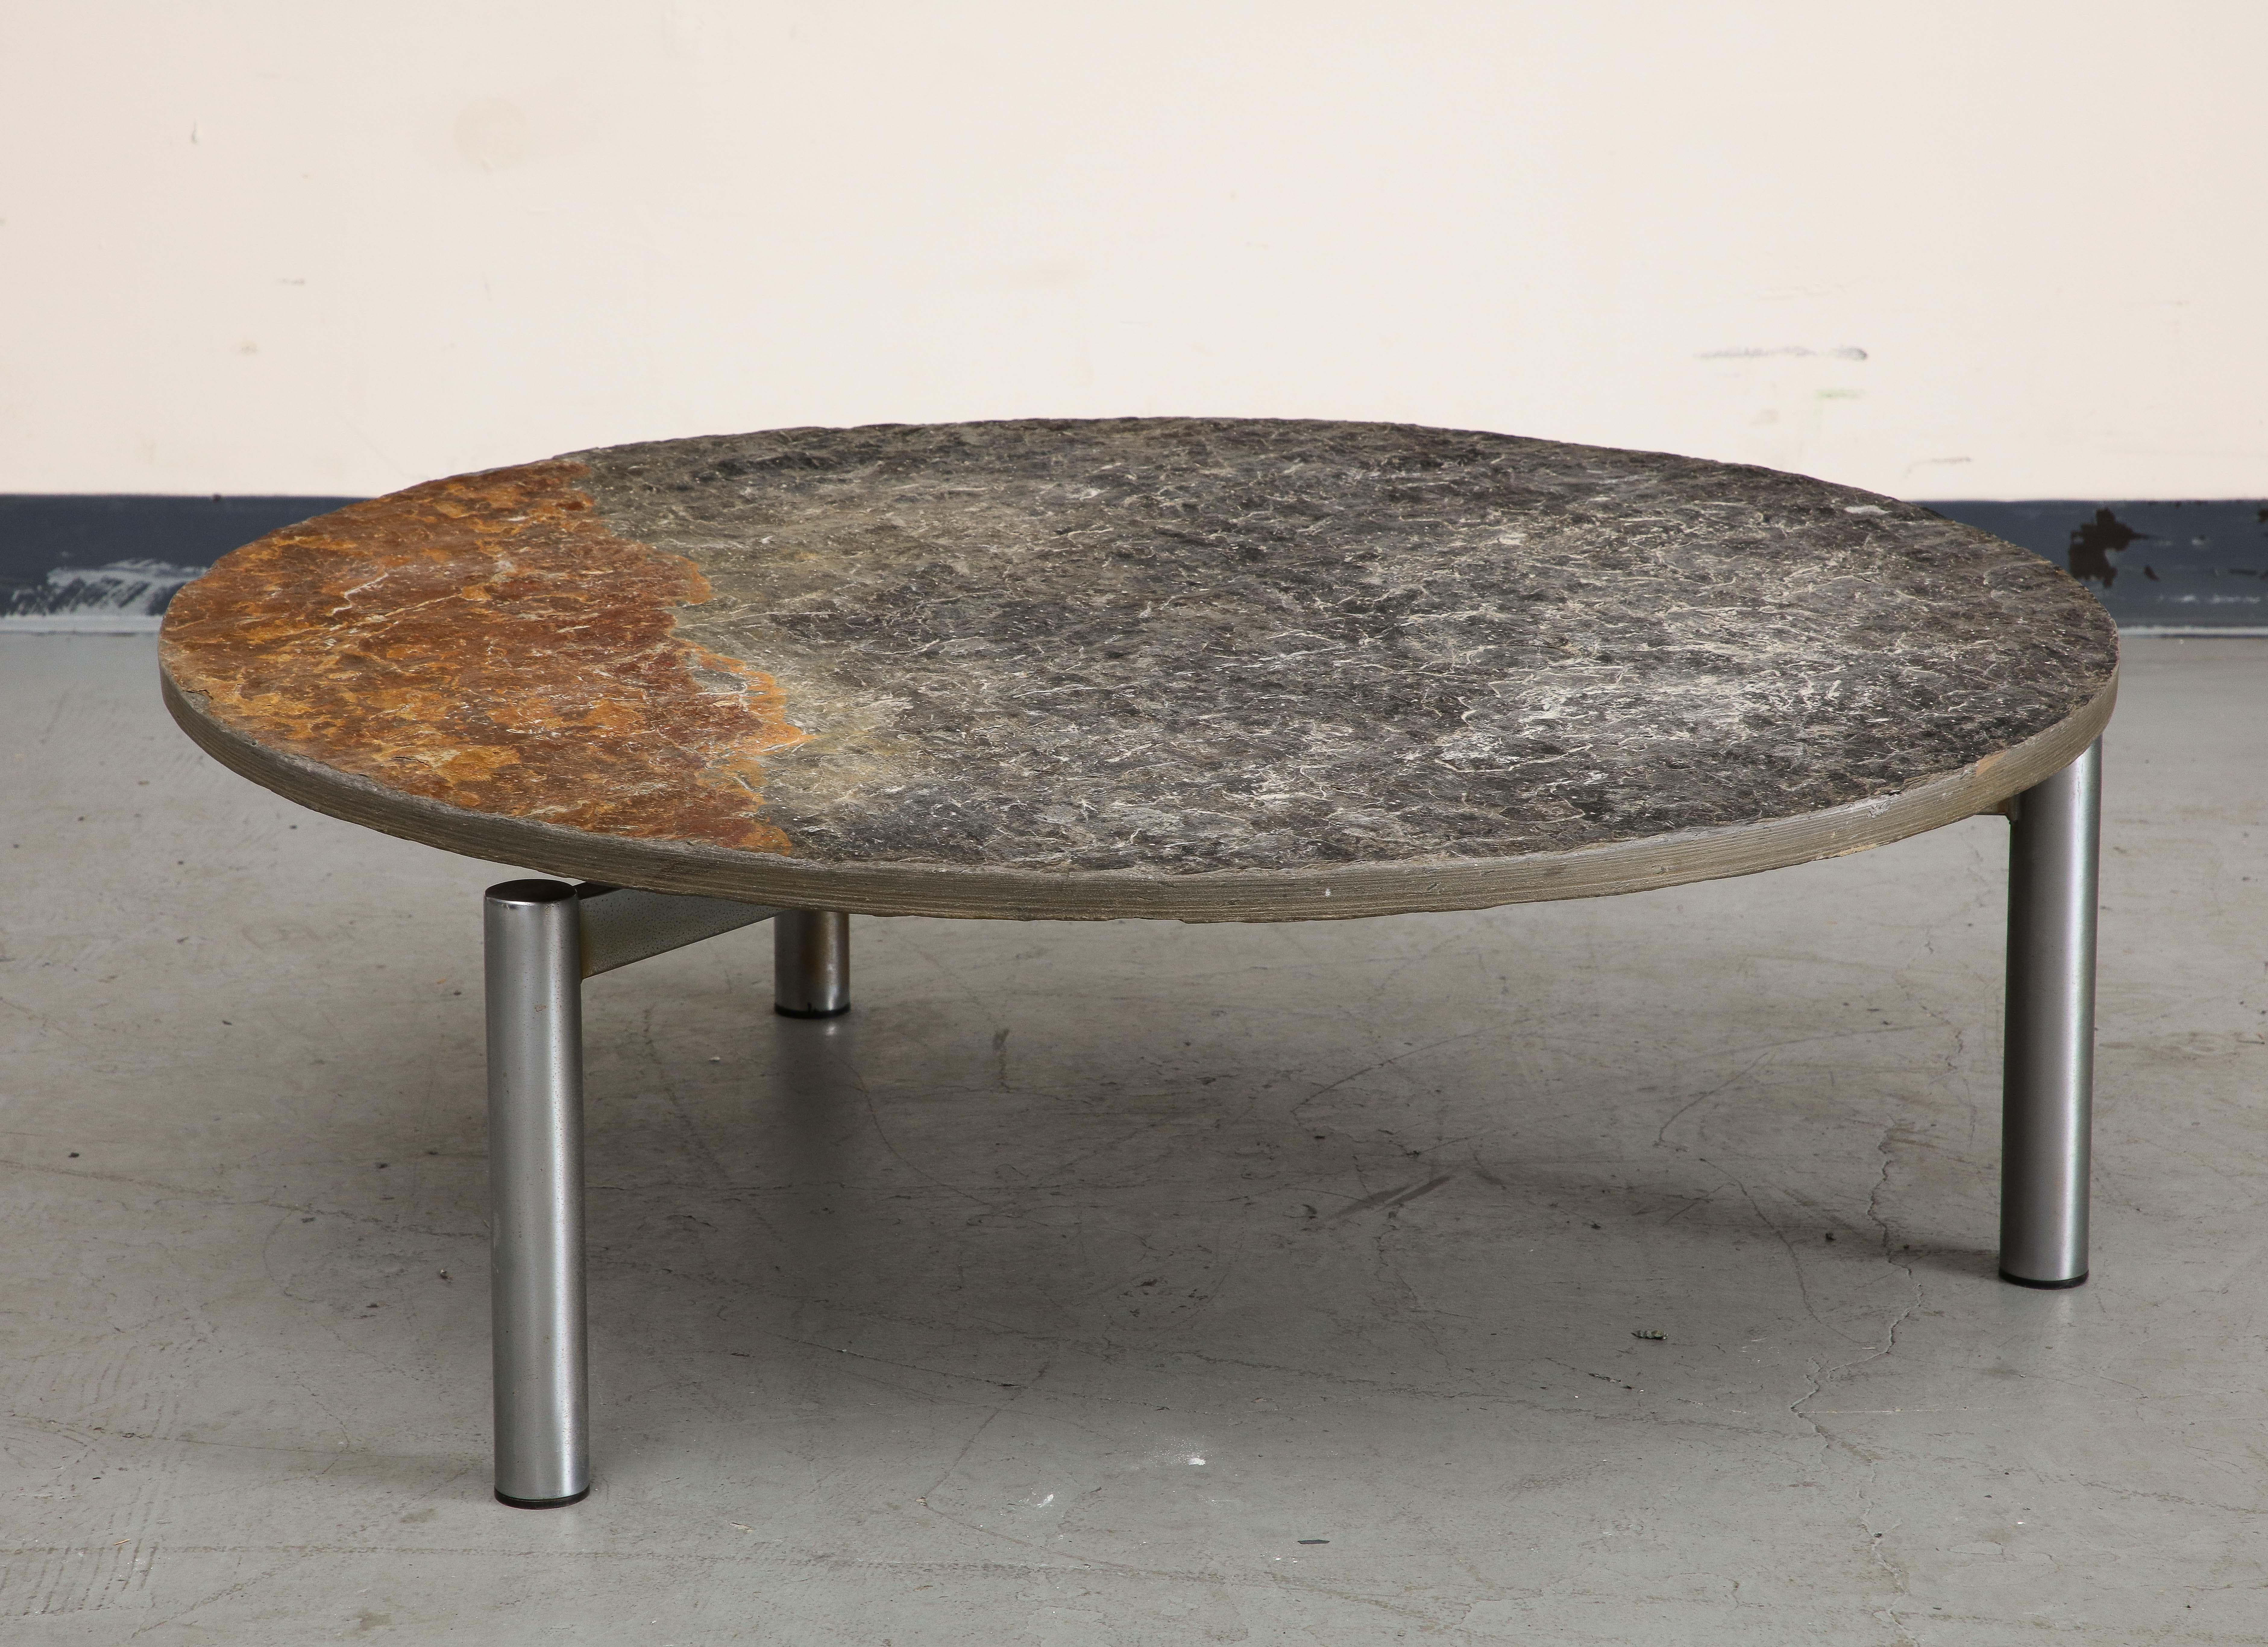 French Midcentury Chromed Steel Coffee Table with Round Natural Slate Top In Good Condition For Sale In Chicago, IL